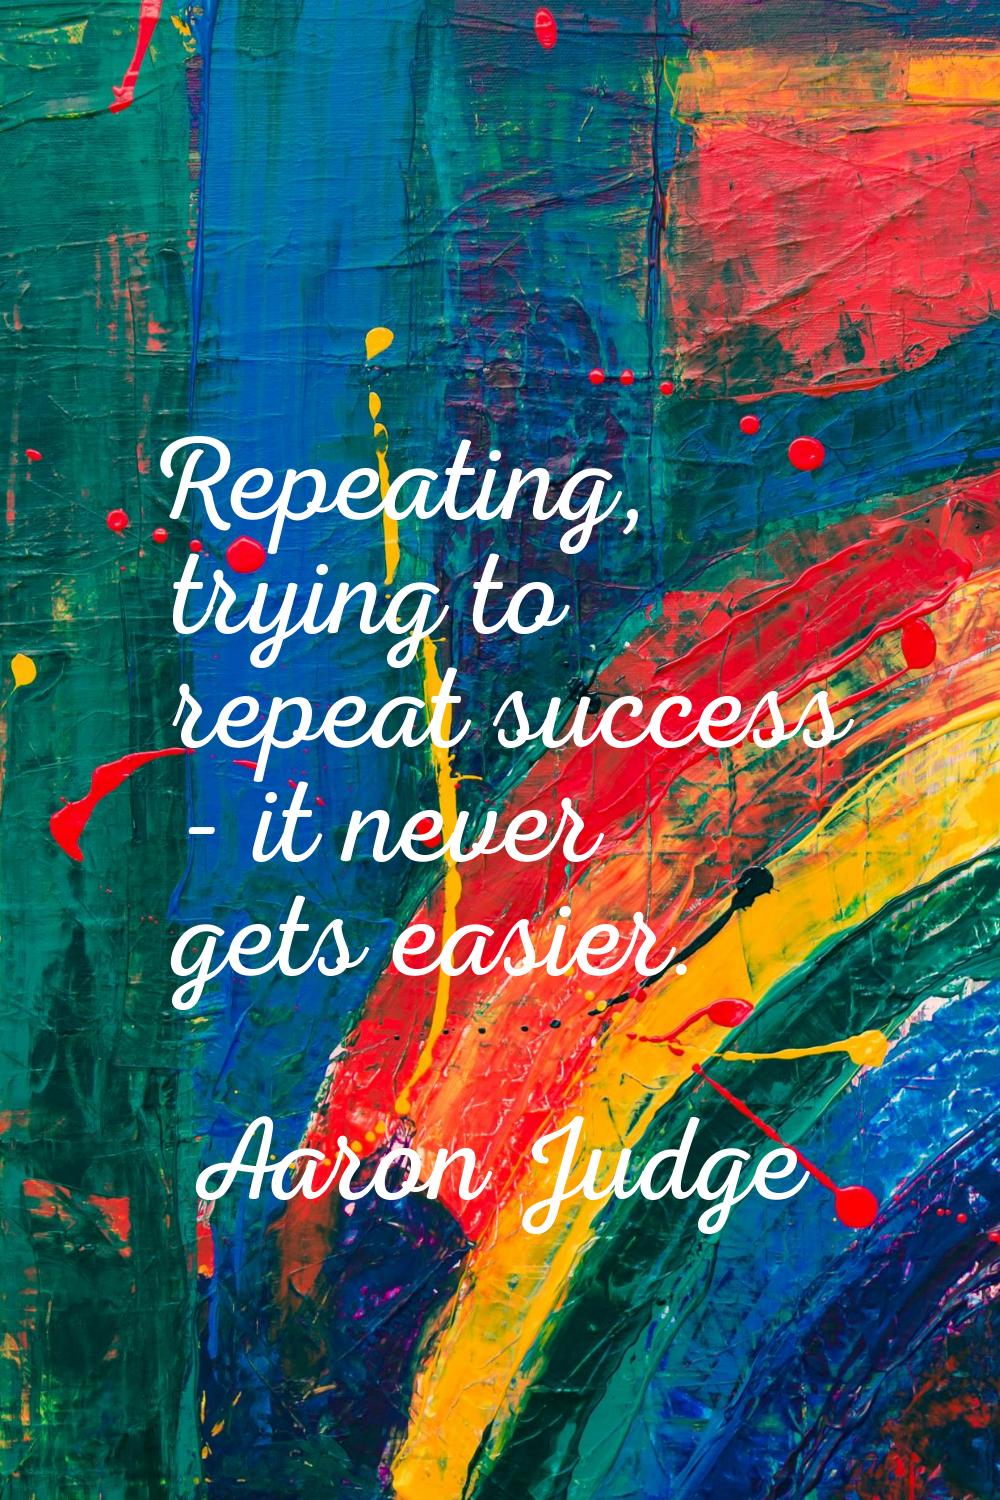 Repeating, trying to repeat success - it never gets easier.